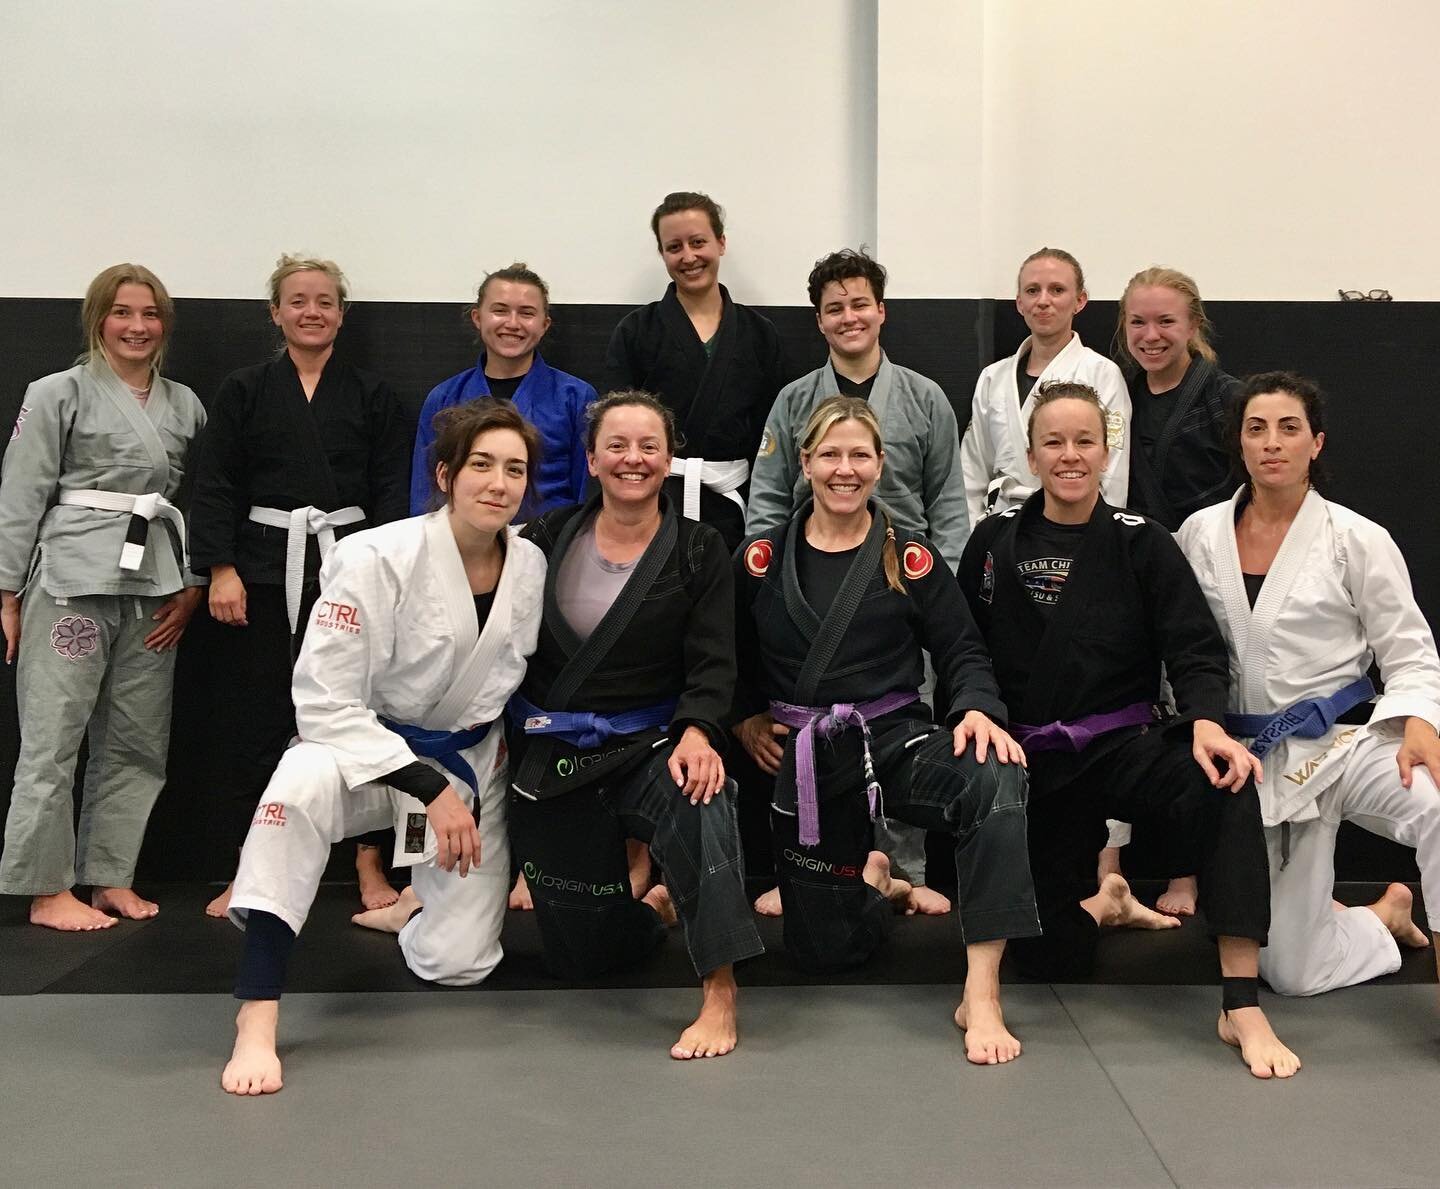 Women&rsquo;s class bringing the focused heat. Ready for #NAGA. All levels welcome, all the time. Join us. #bjj #jiujitsu #hurricanejj #competition #fitness #selfdefense #cle #cleveland #westpark